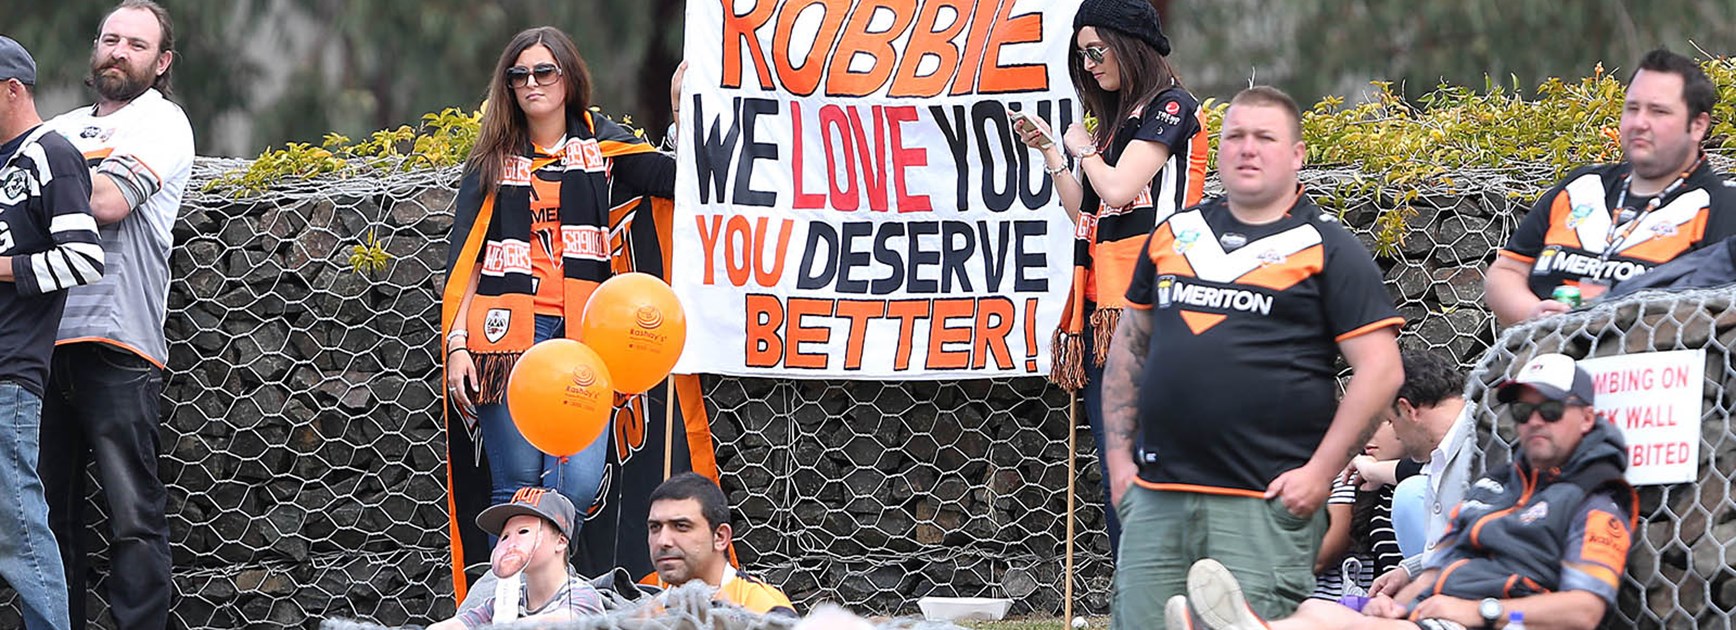 Wests Tigers fans show their support for Robbie Farah.